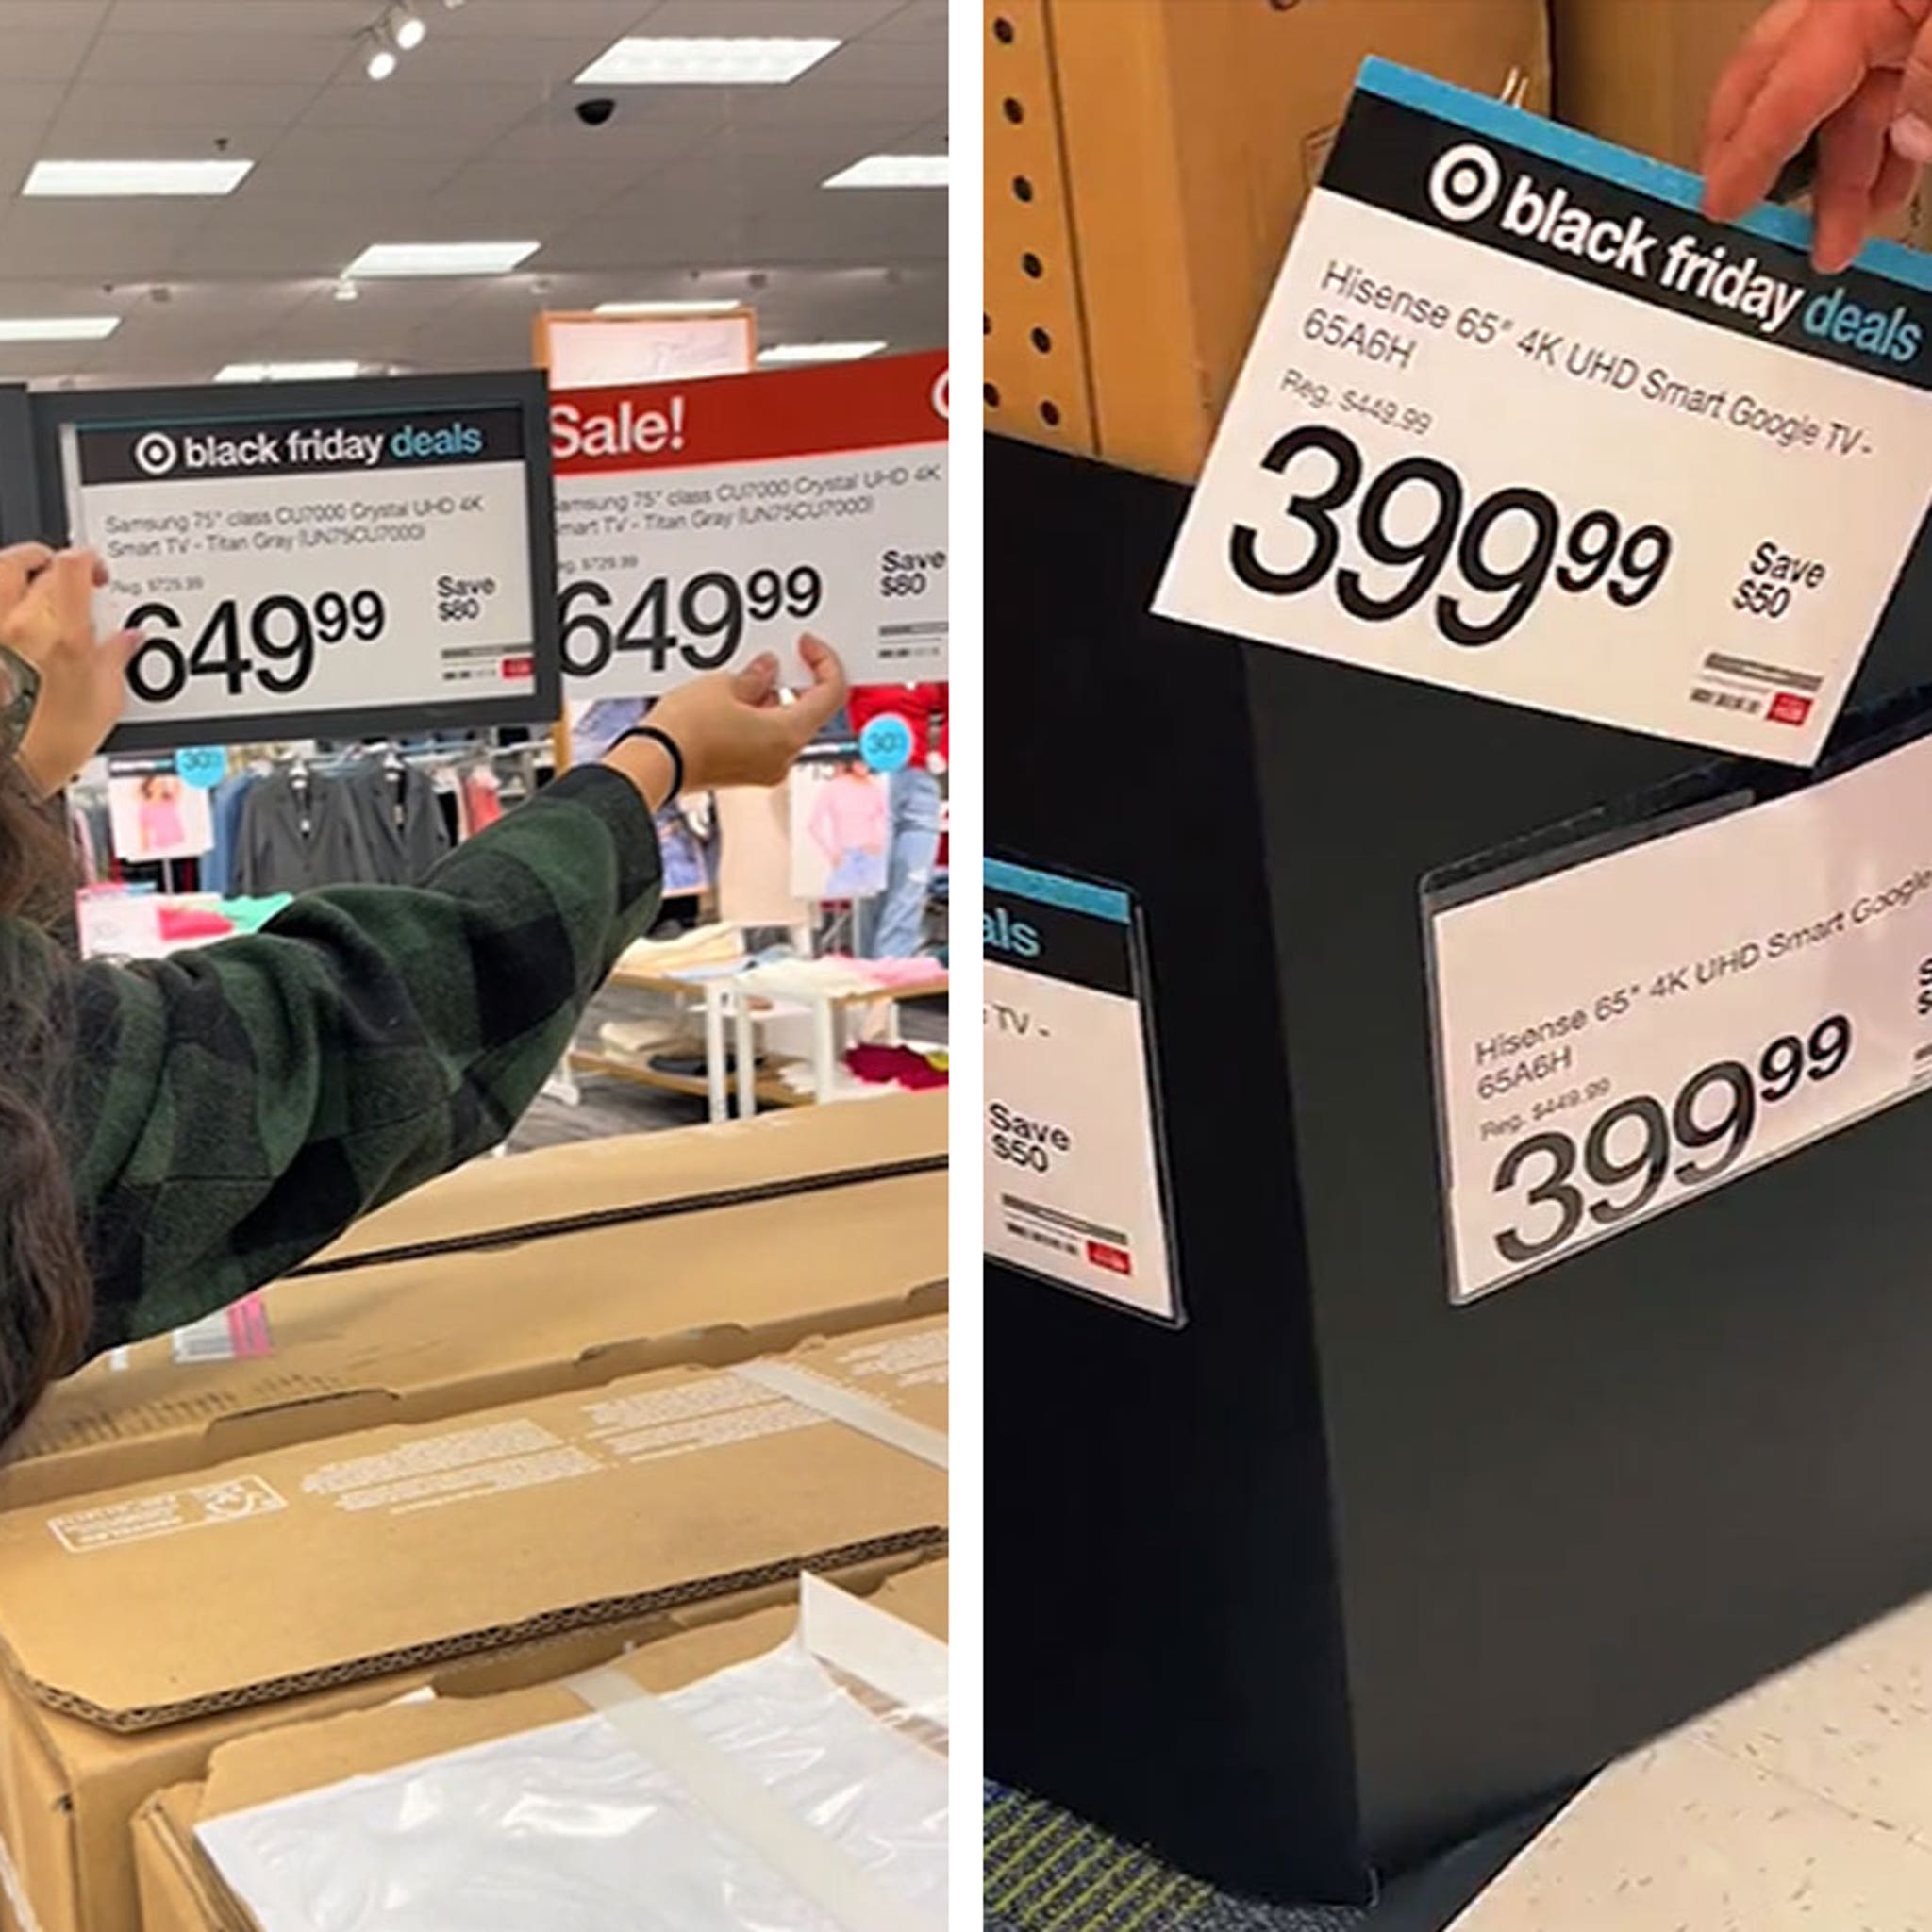 Target caught skipping discounts in 'Black Friday deals